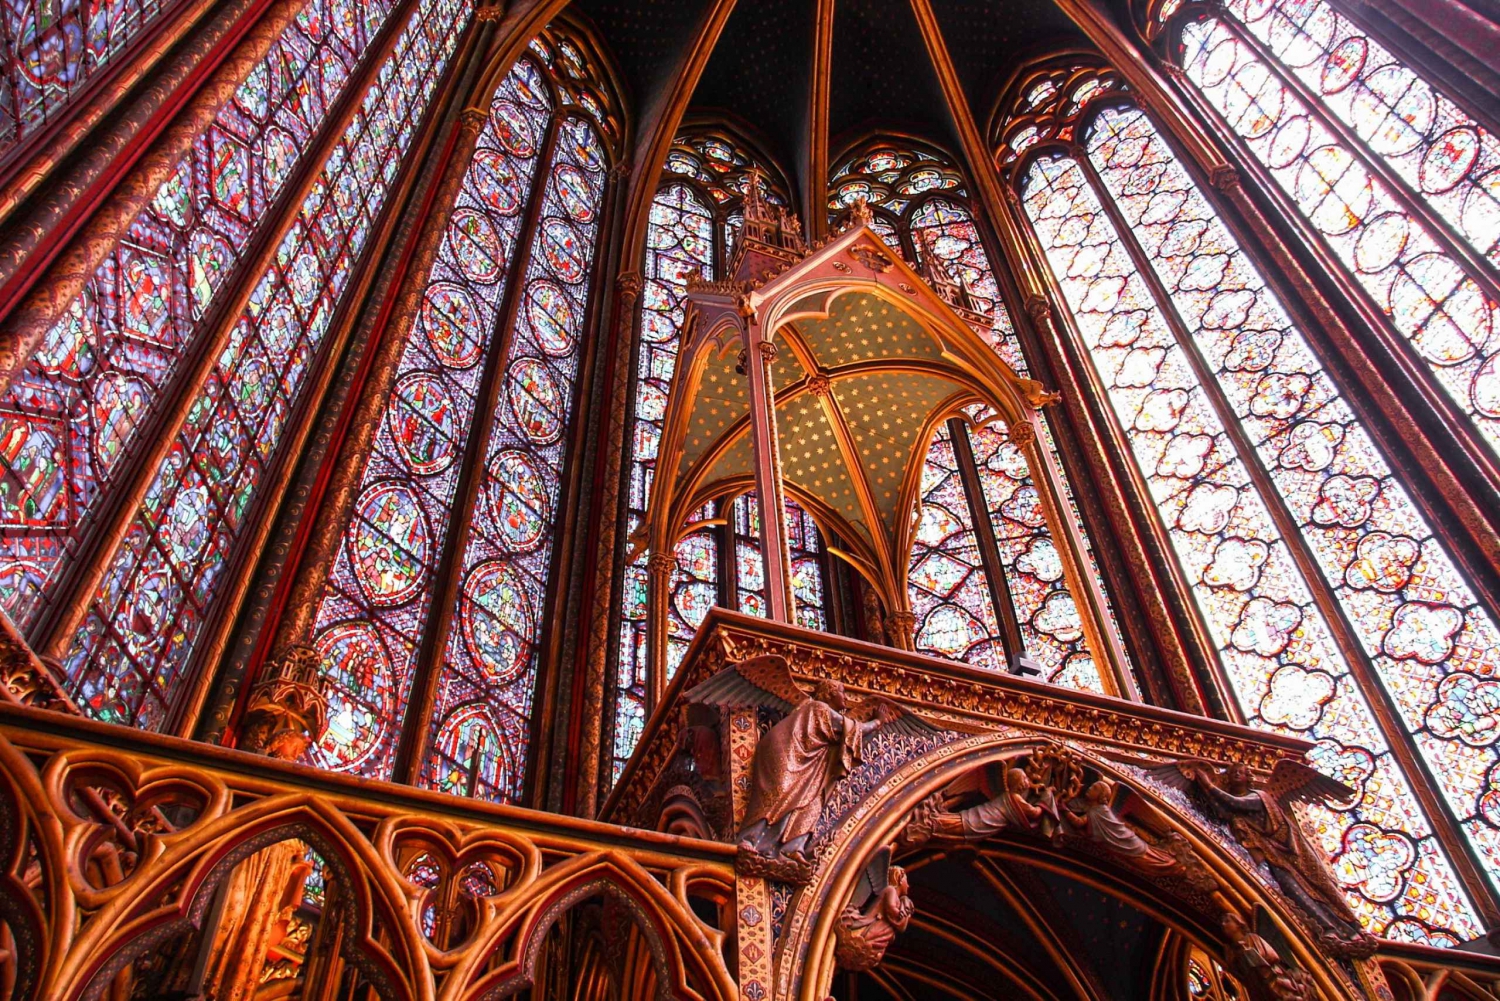 Marvel-at-the-Beauty-of-Sainte-Chapelle